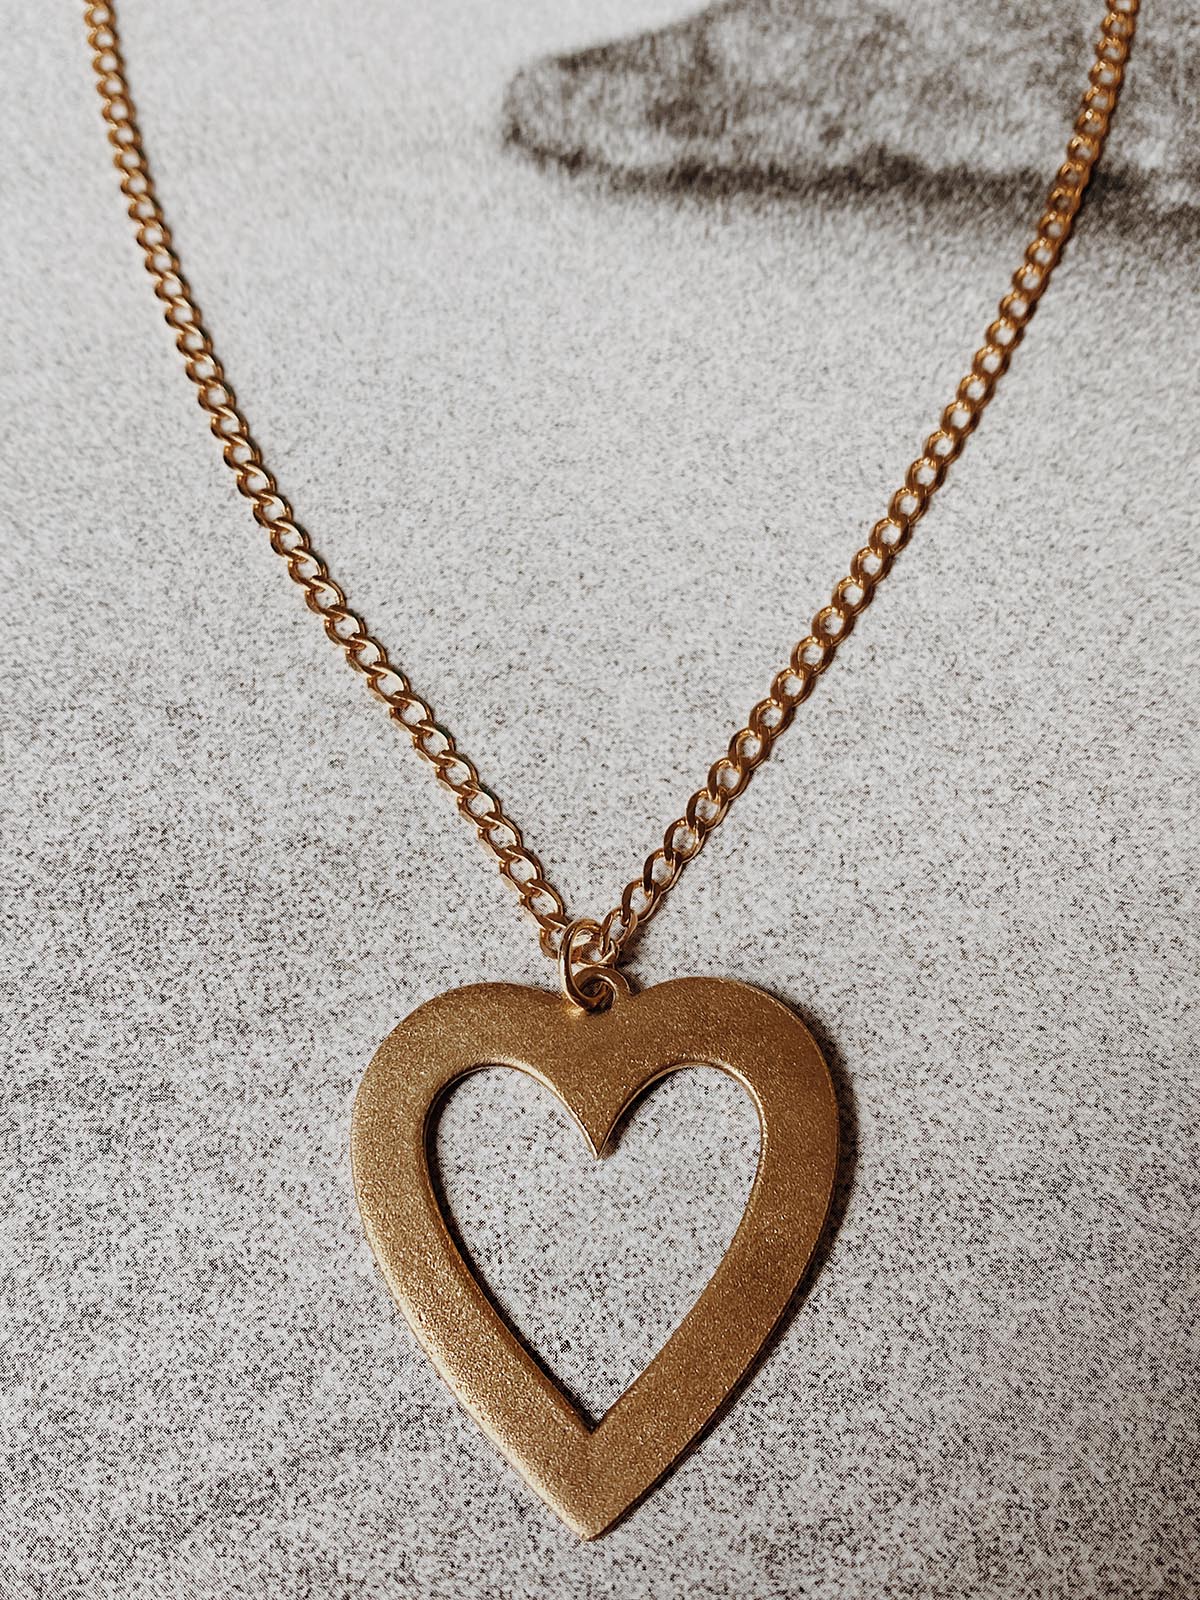 Vintage Curb Chain with Heart Pendant